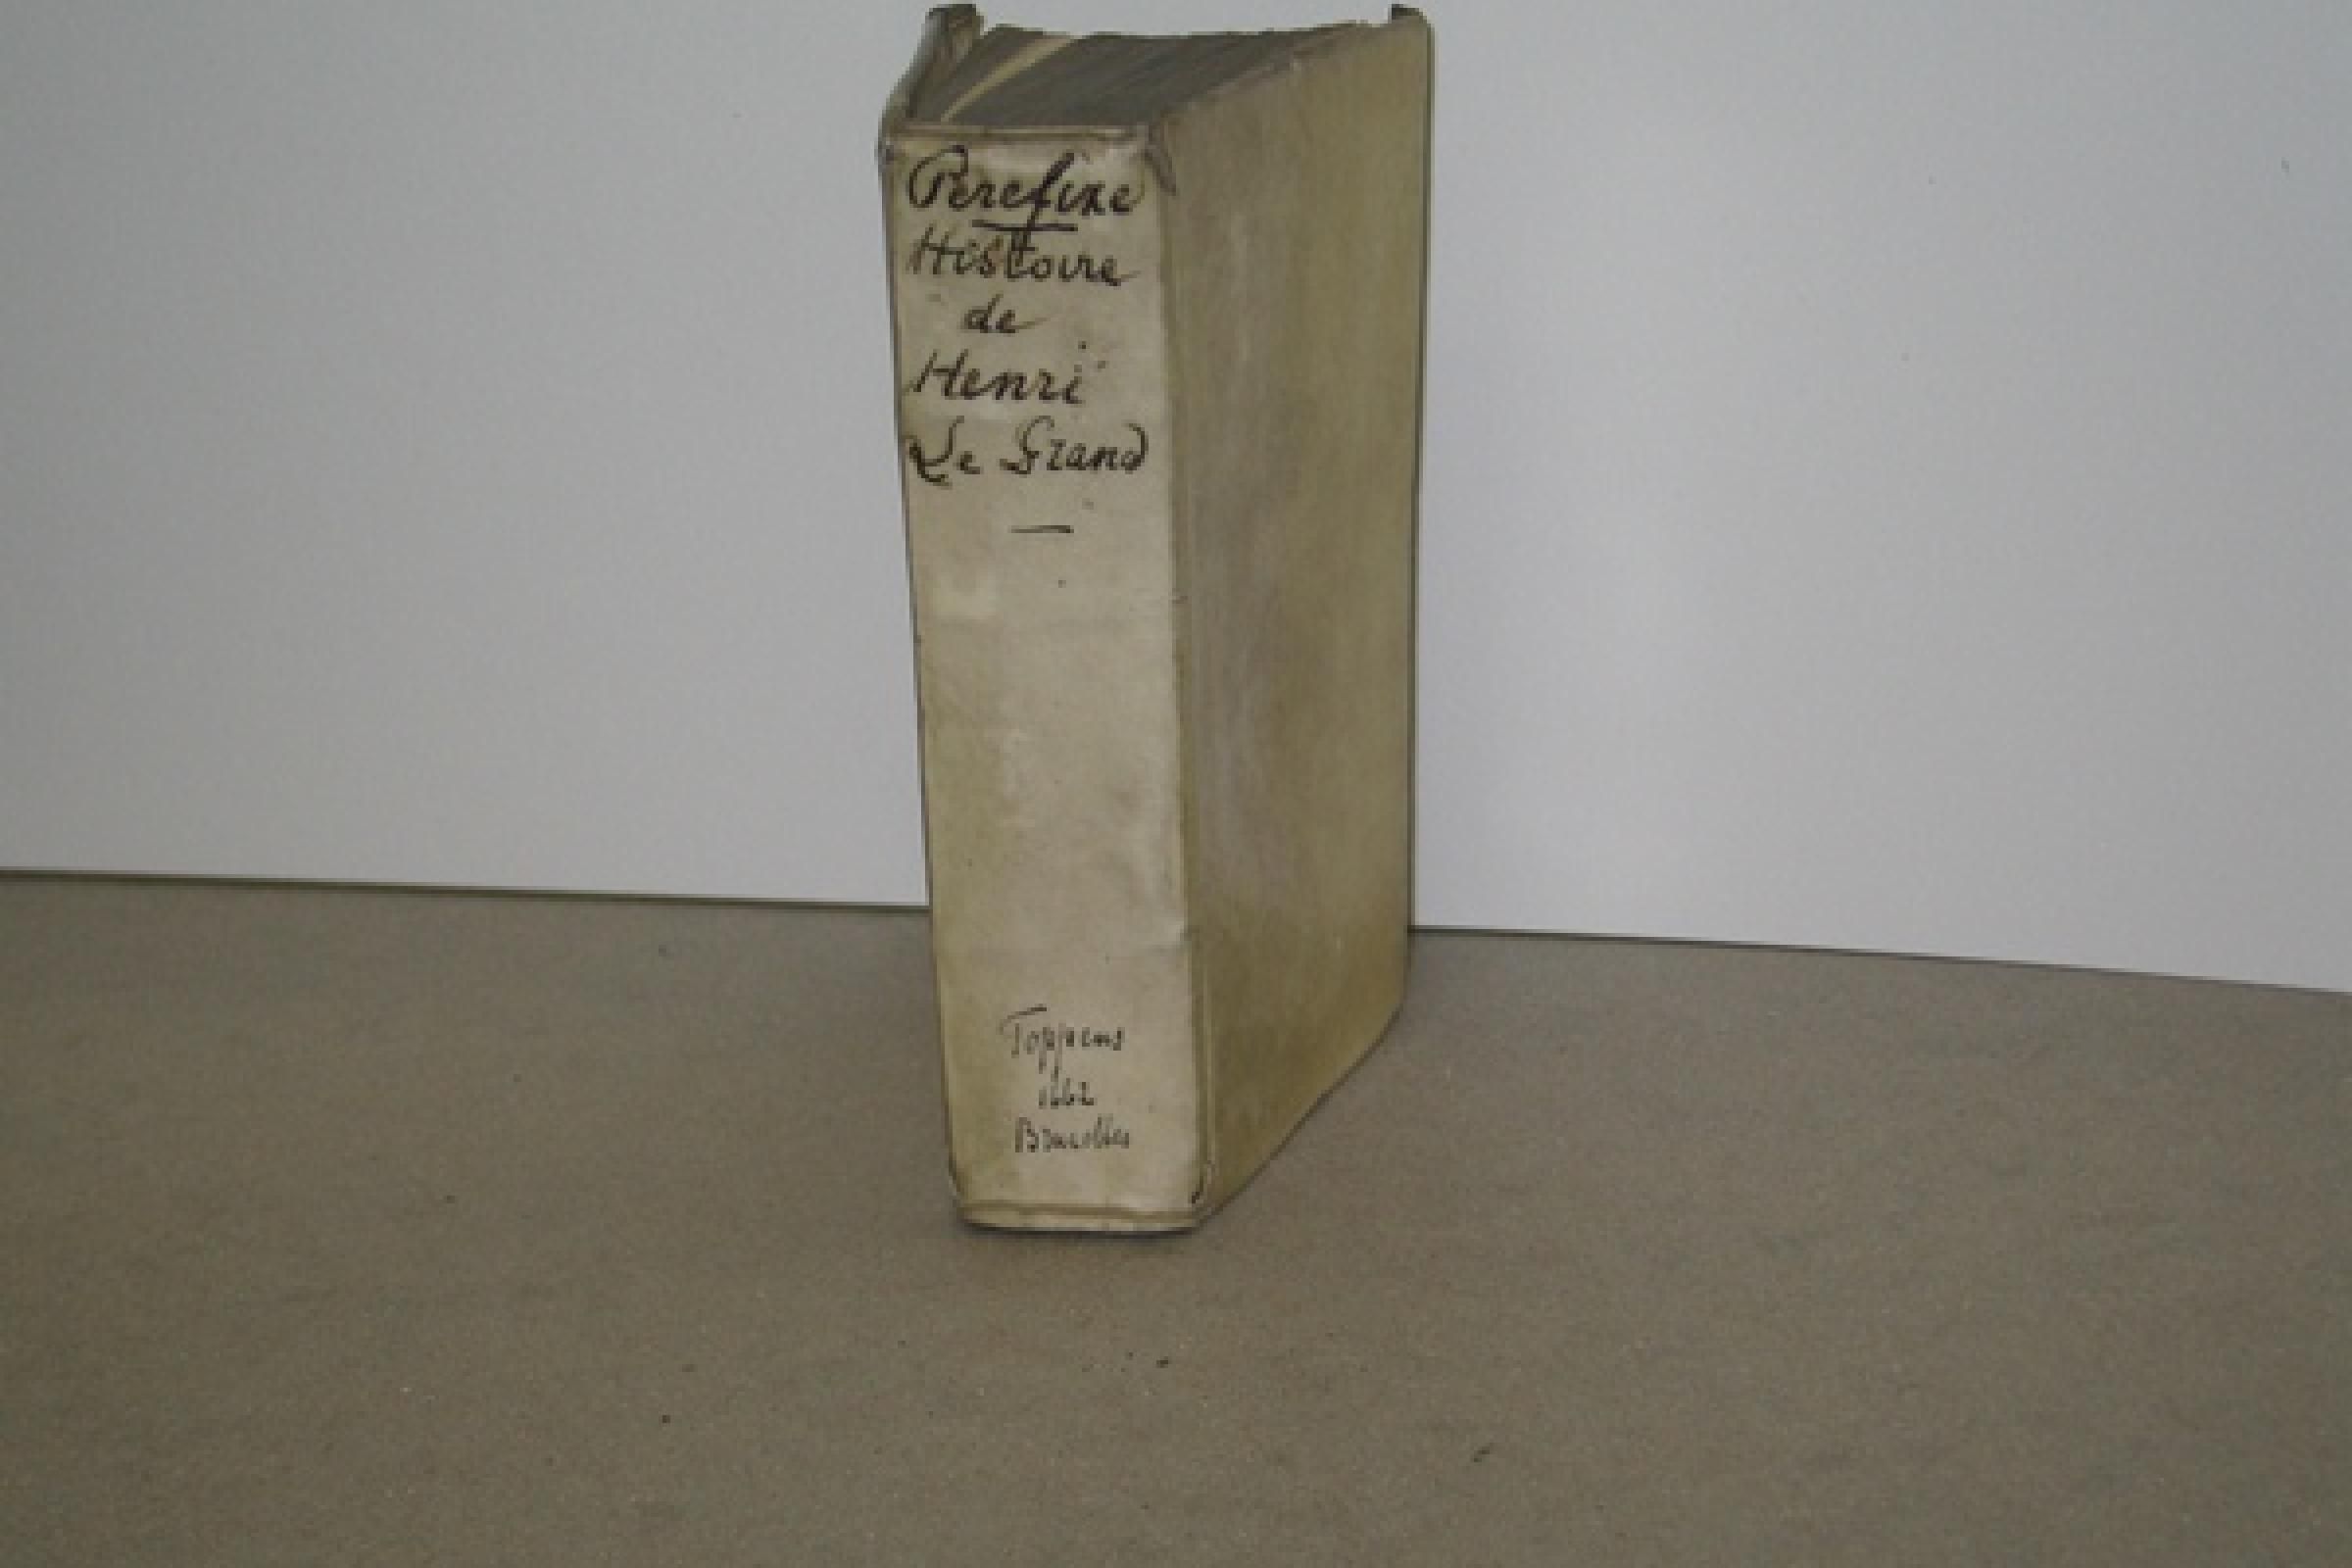 Vellum bound book from Elsevier Collection